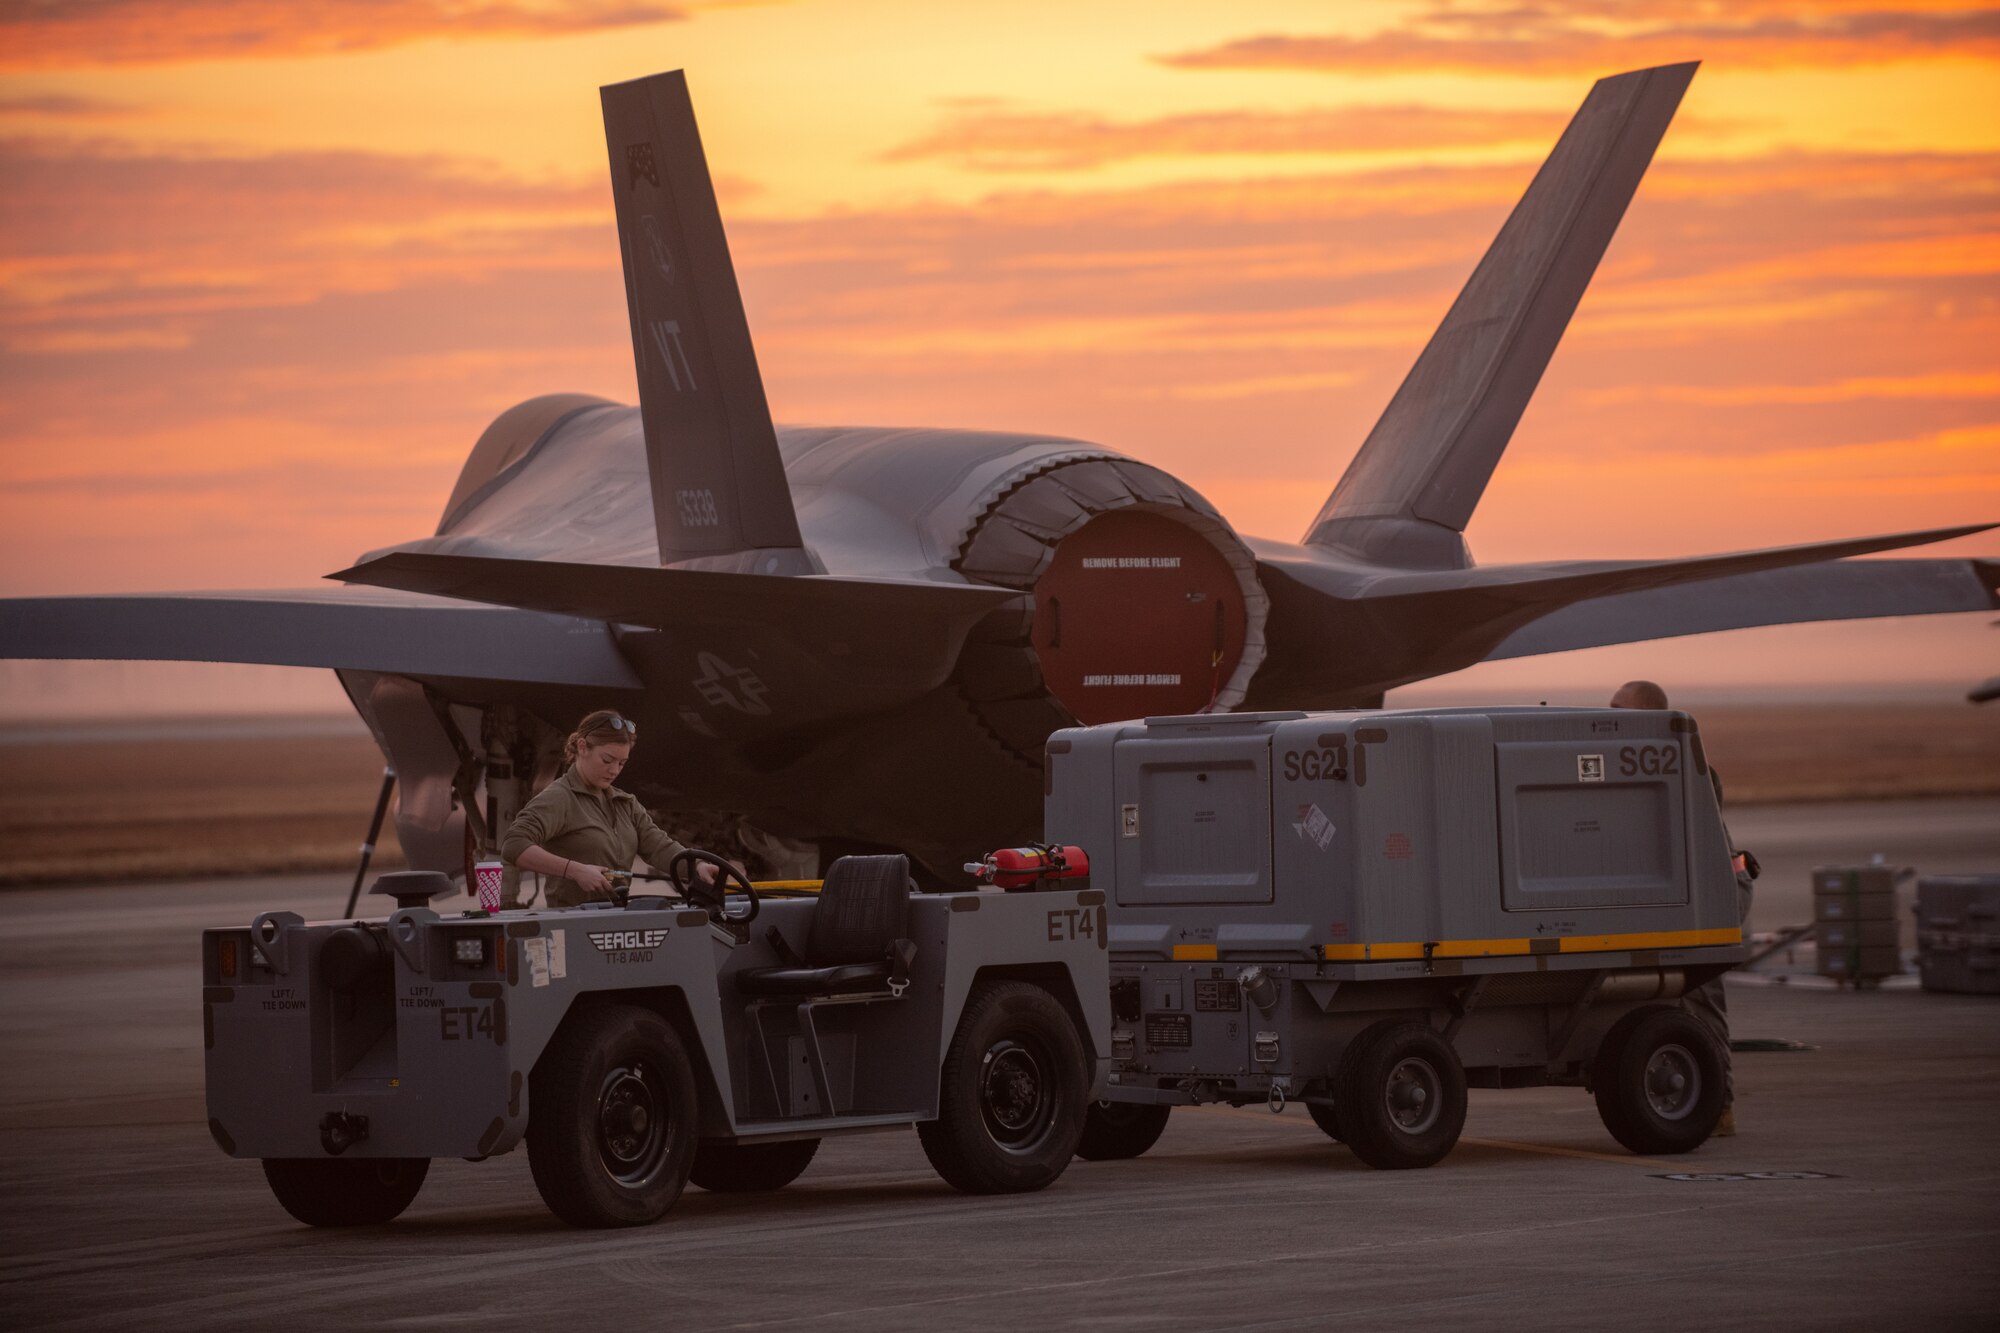 Senior Airman Isabel Murphy, a crew chief assigned to the 158th Maintenance Group, Vermont Air National Guard, prepare’s F-35A Lightning IIs for morning launch during a training exercise